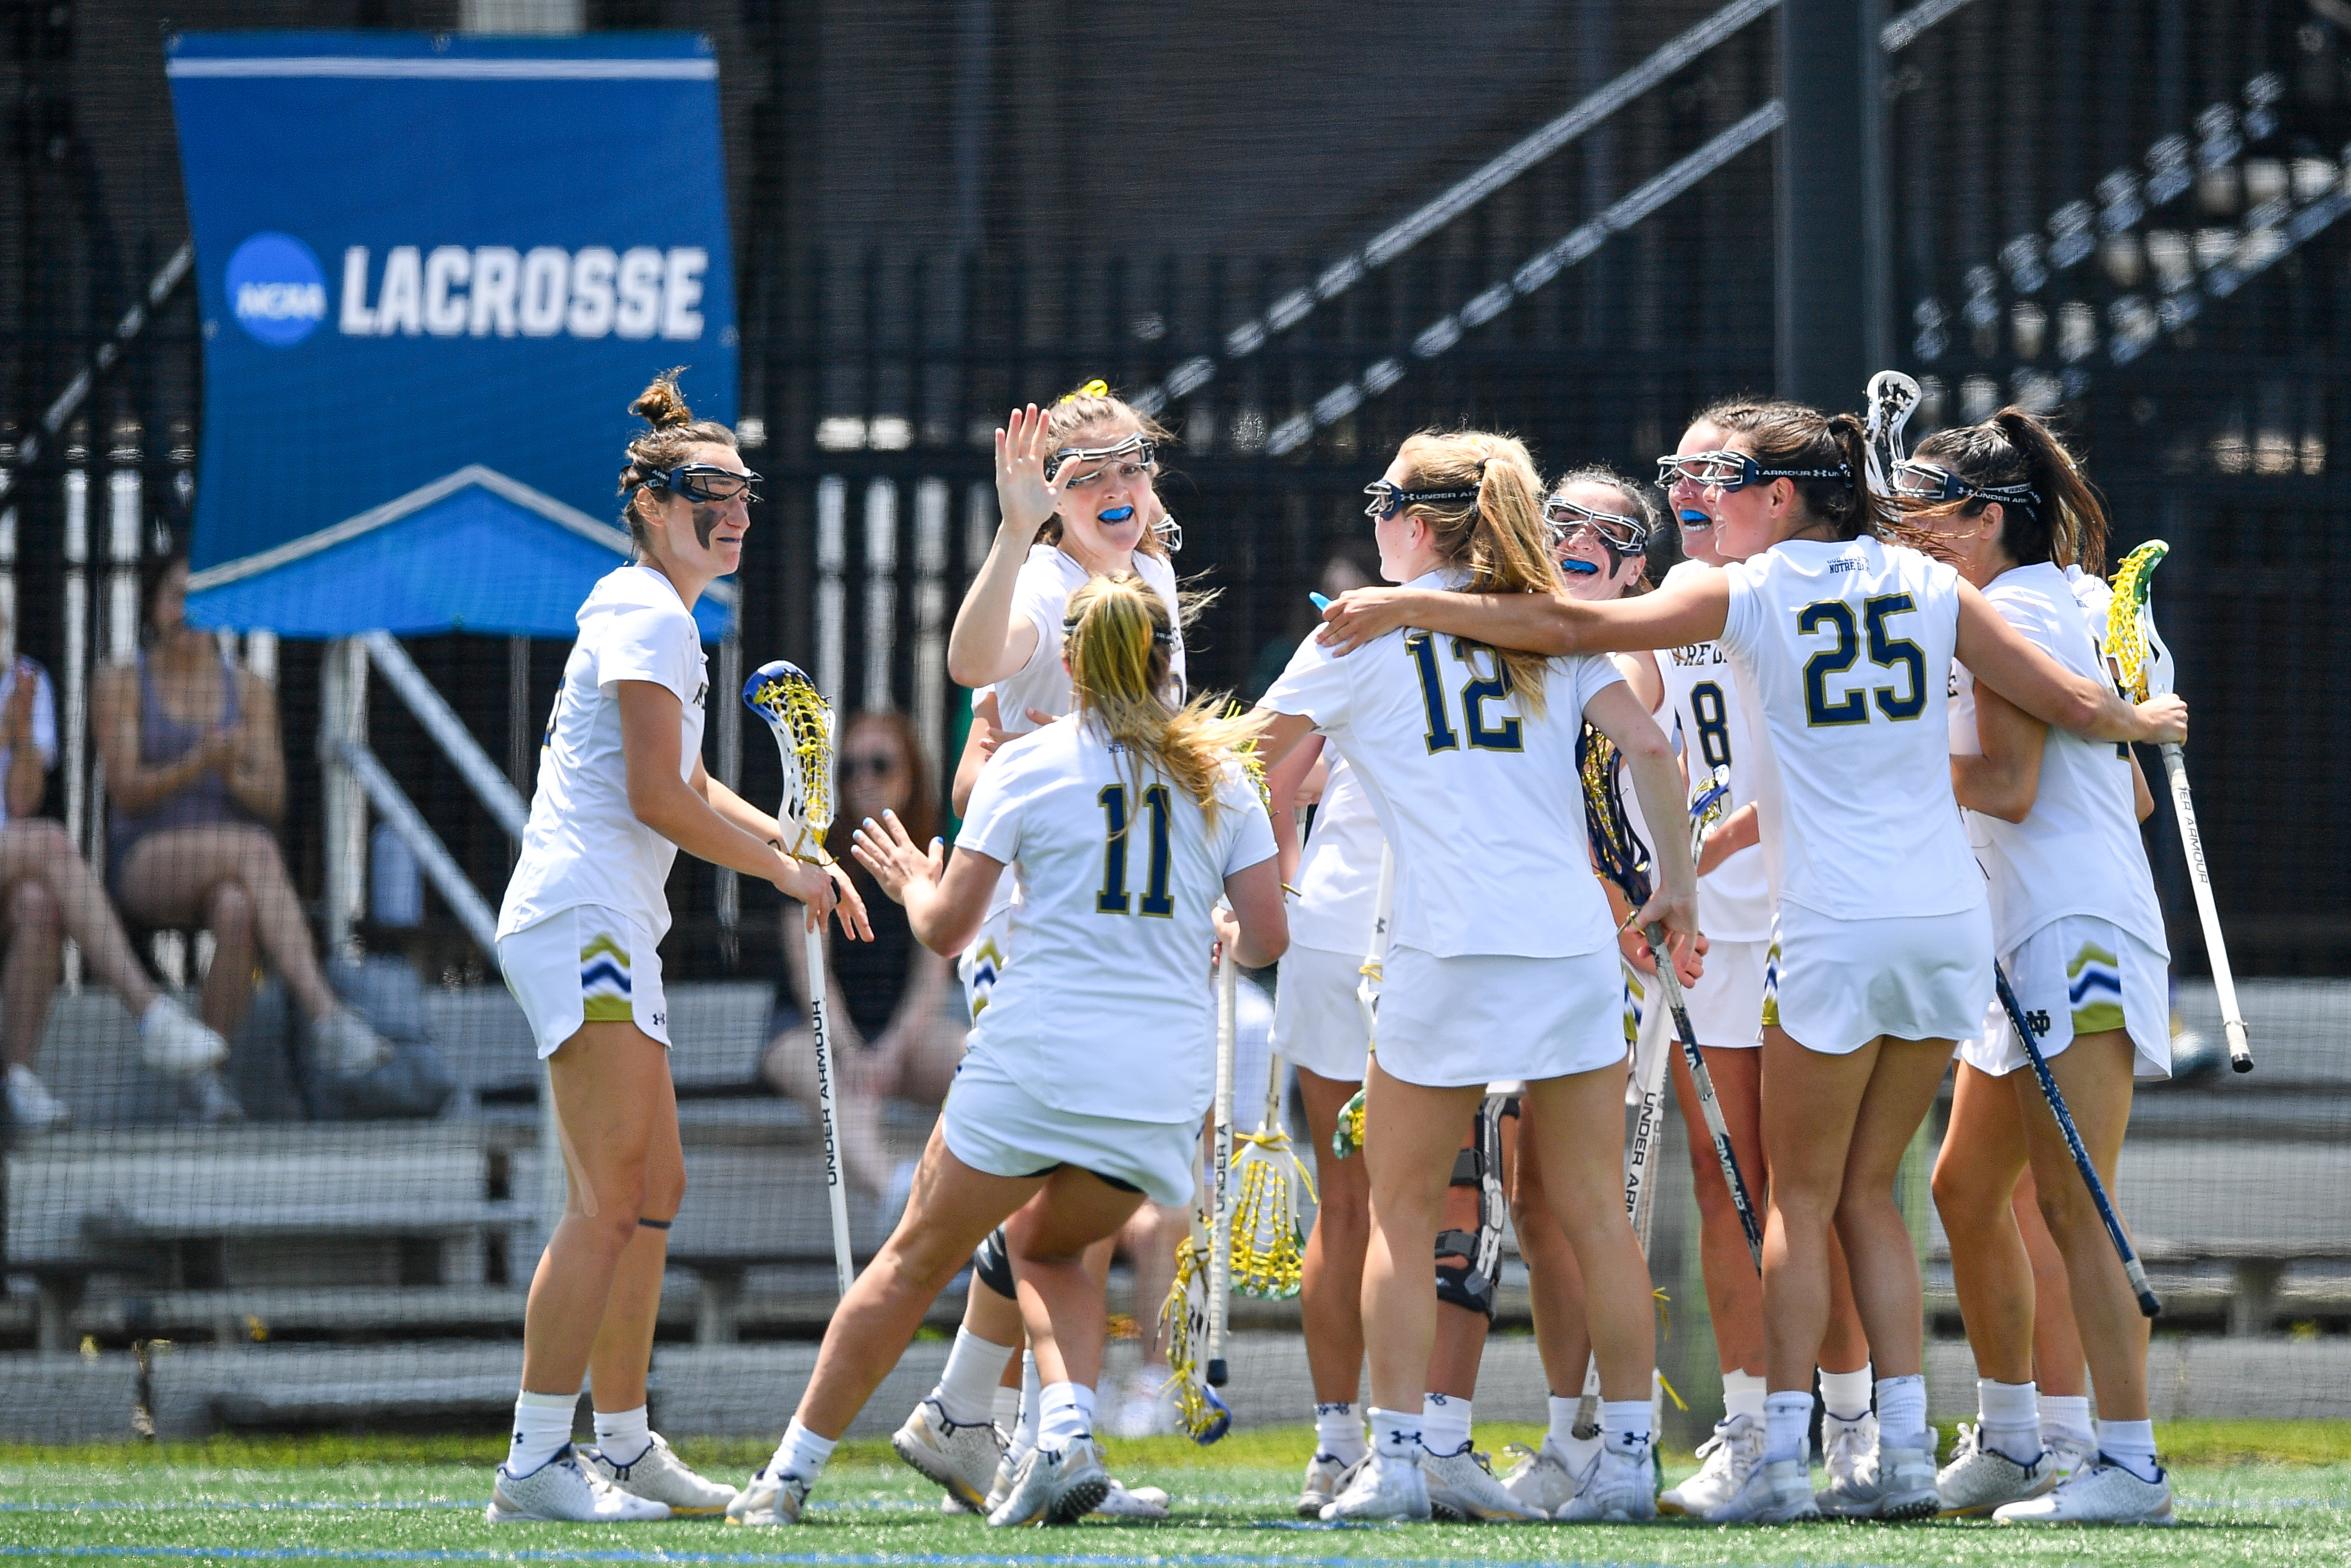 ND Women’s Lacrosse: Welcome To The NCAA Quarterfinals